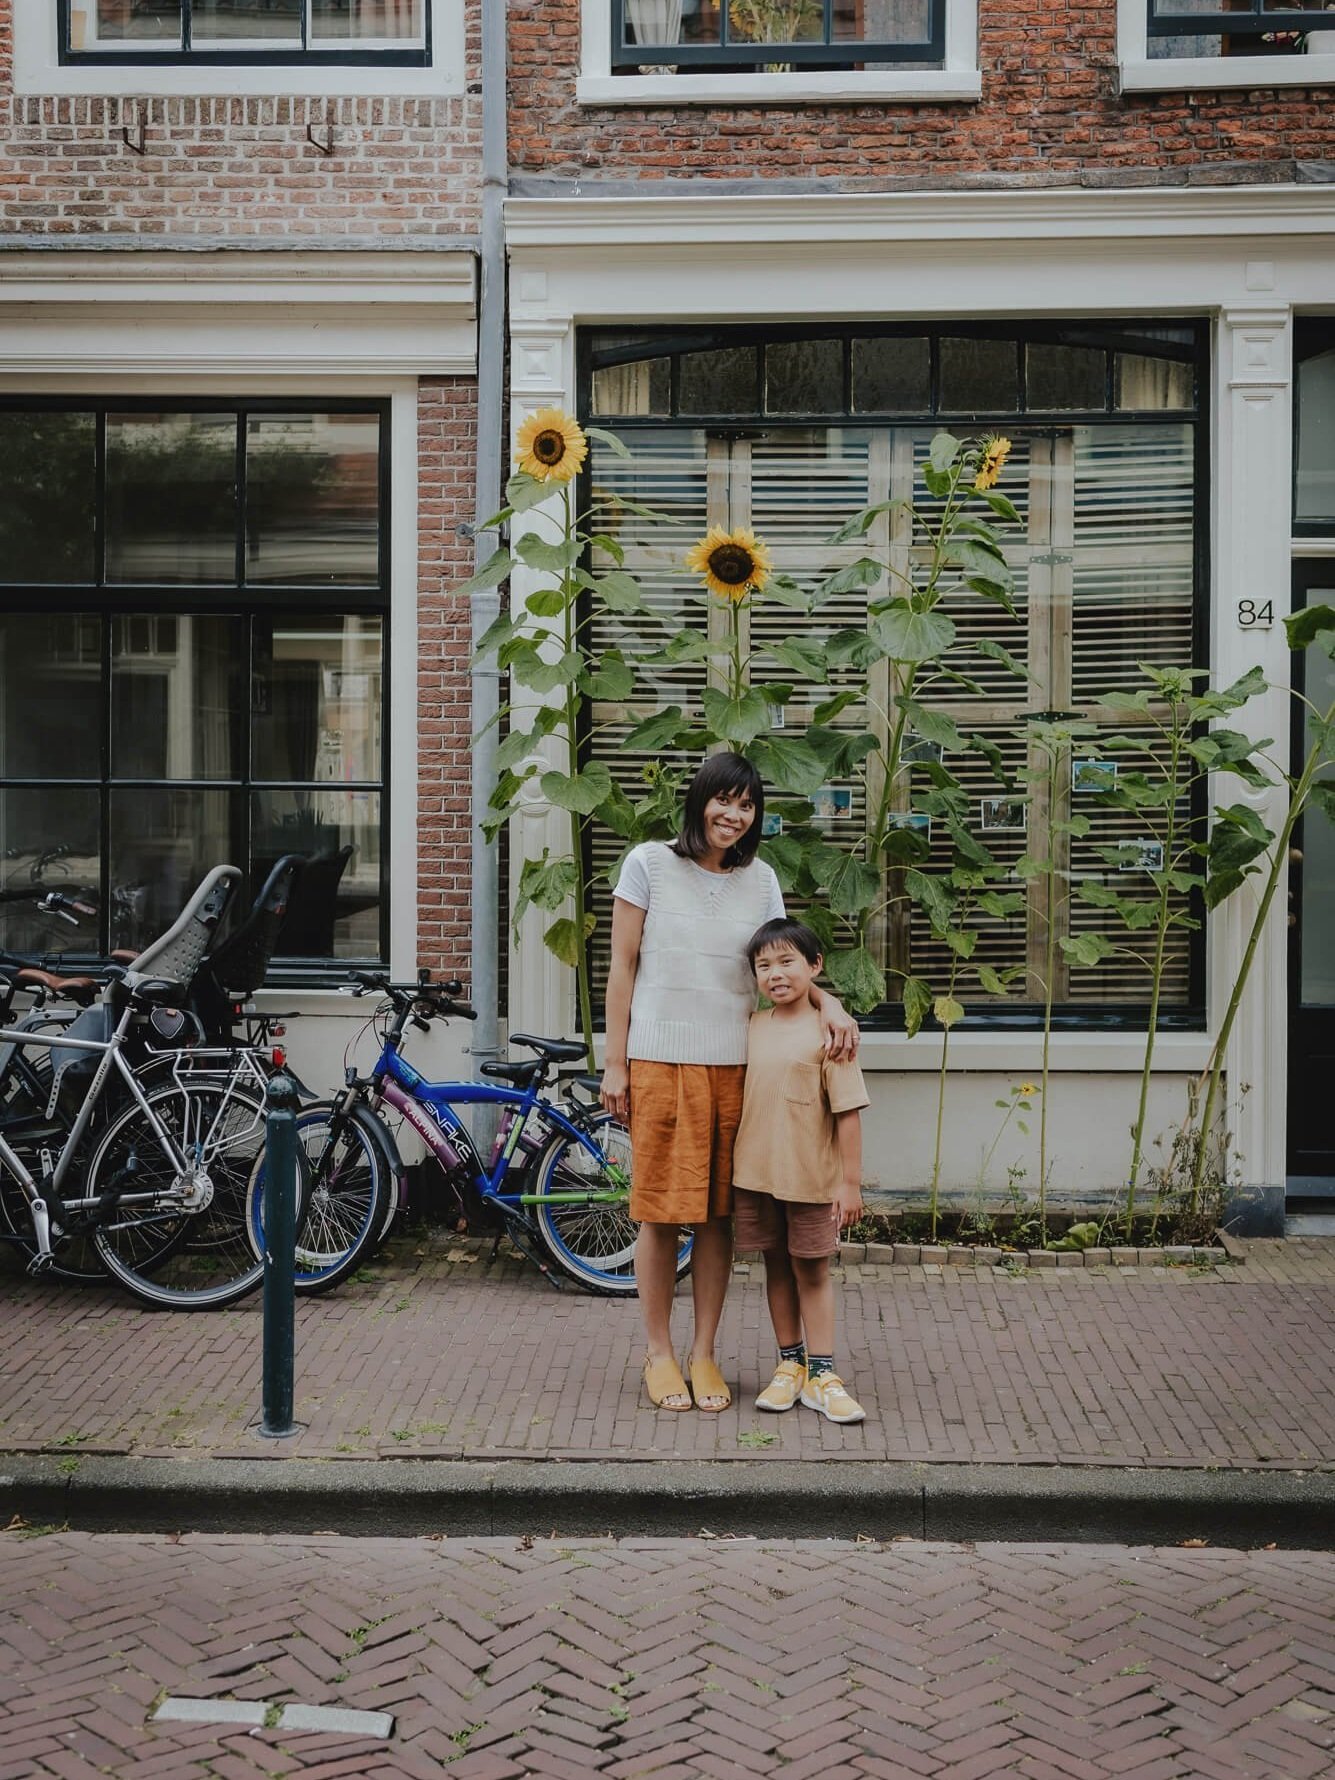 Family photoshoot in Haarlem, the Netherlands